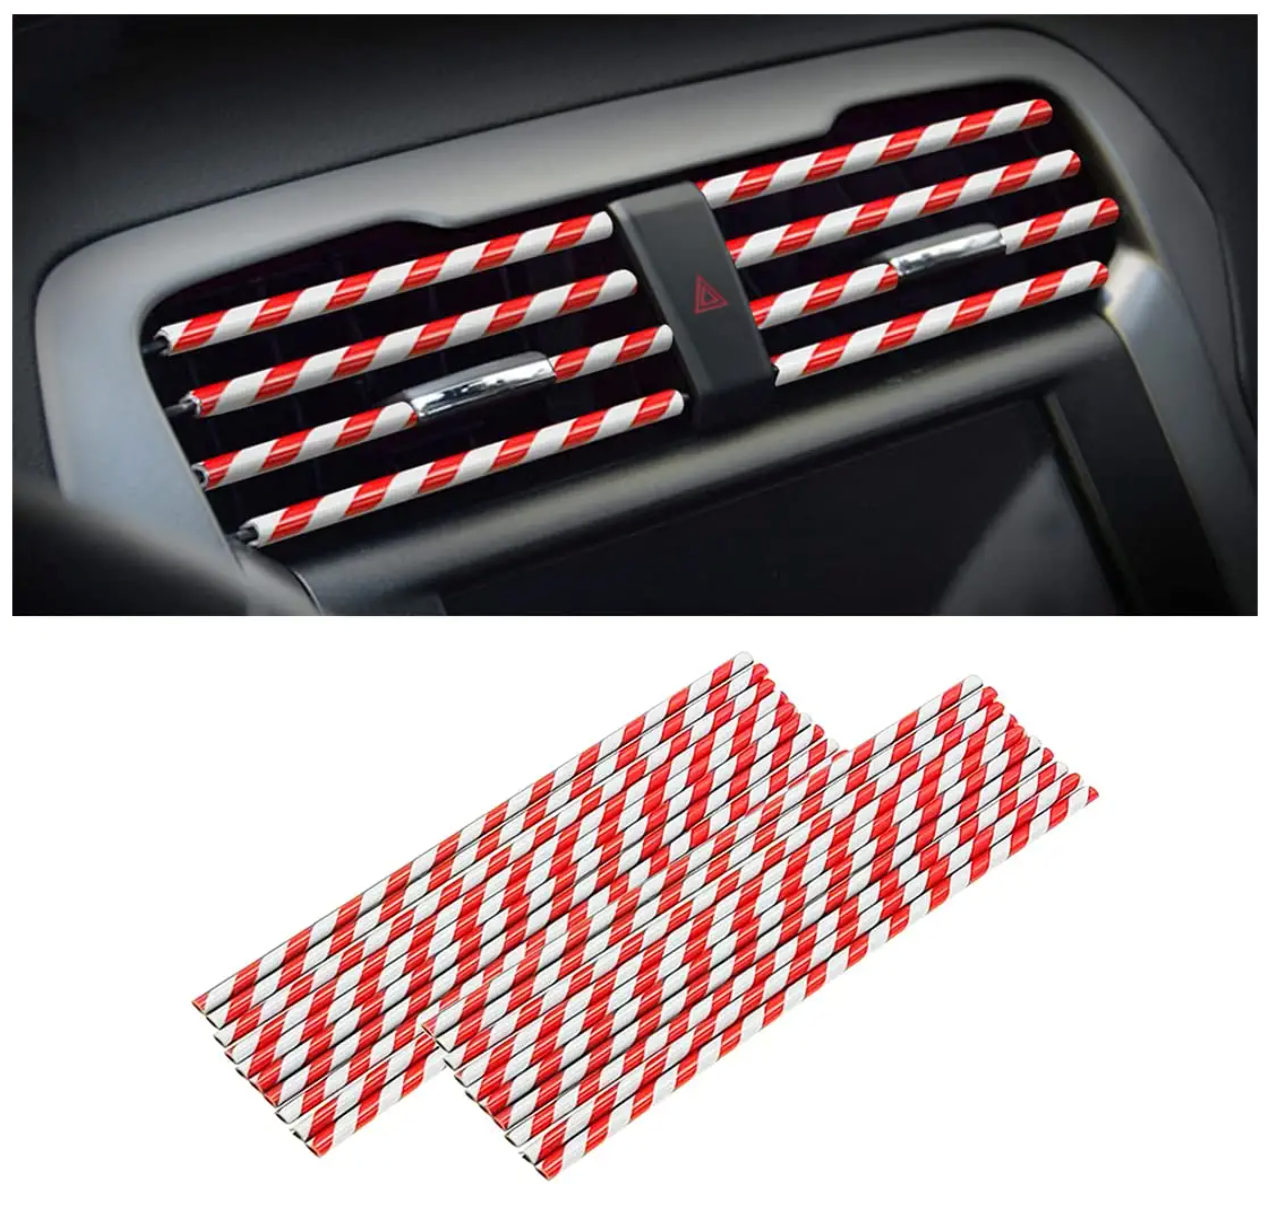 Car Air Conditioner Decoration Strip 8sanlione for Vent Outlet, Universal Waterproof Bendable Air Vent Outlet Trim Decoration (20 Pieces)